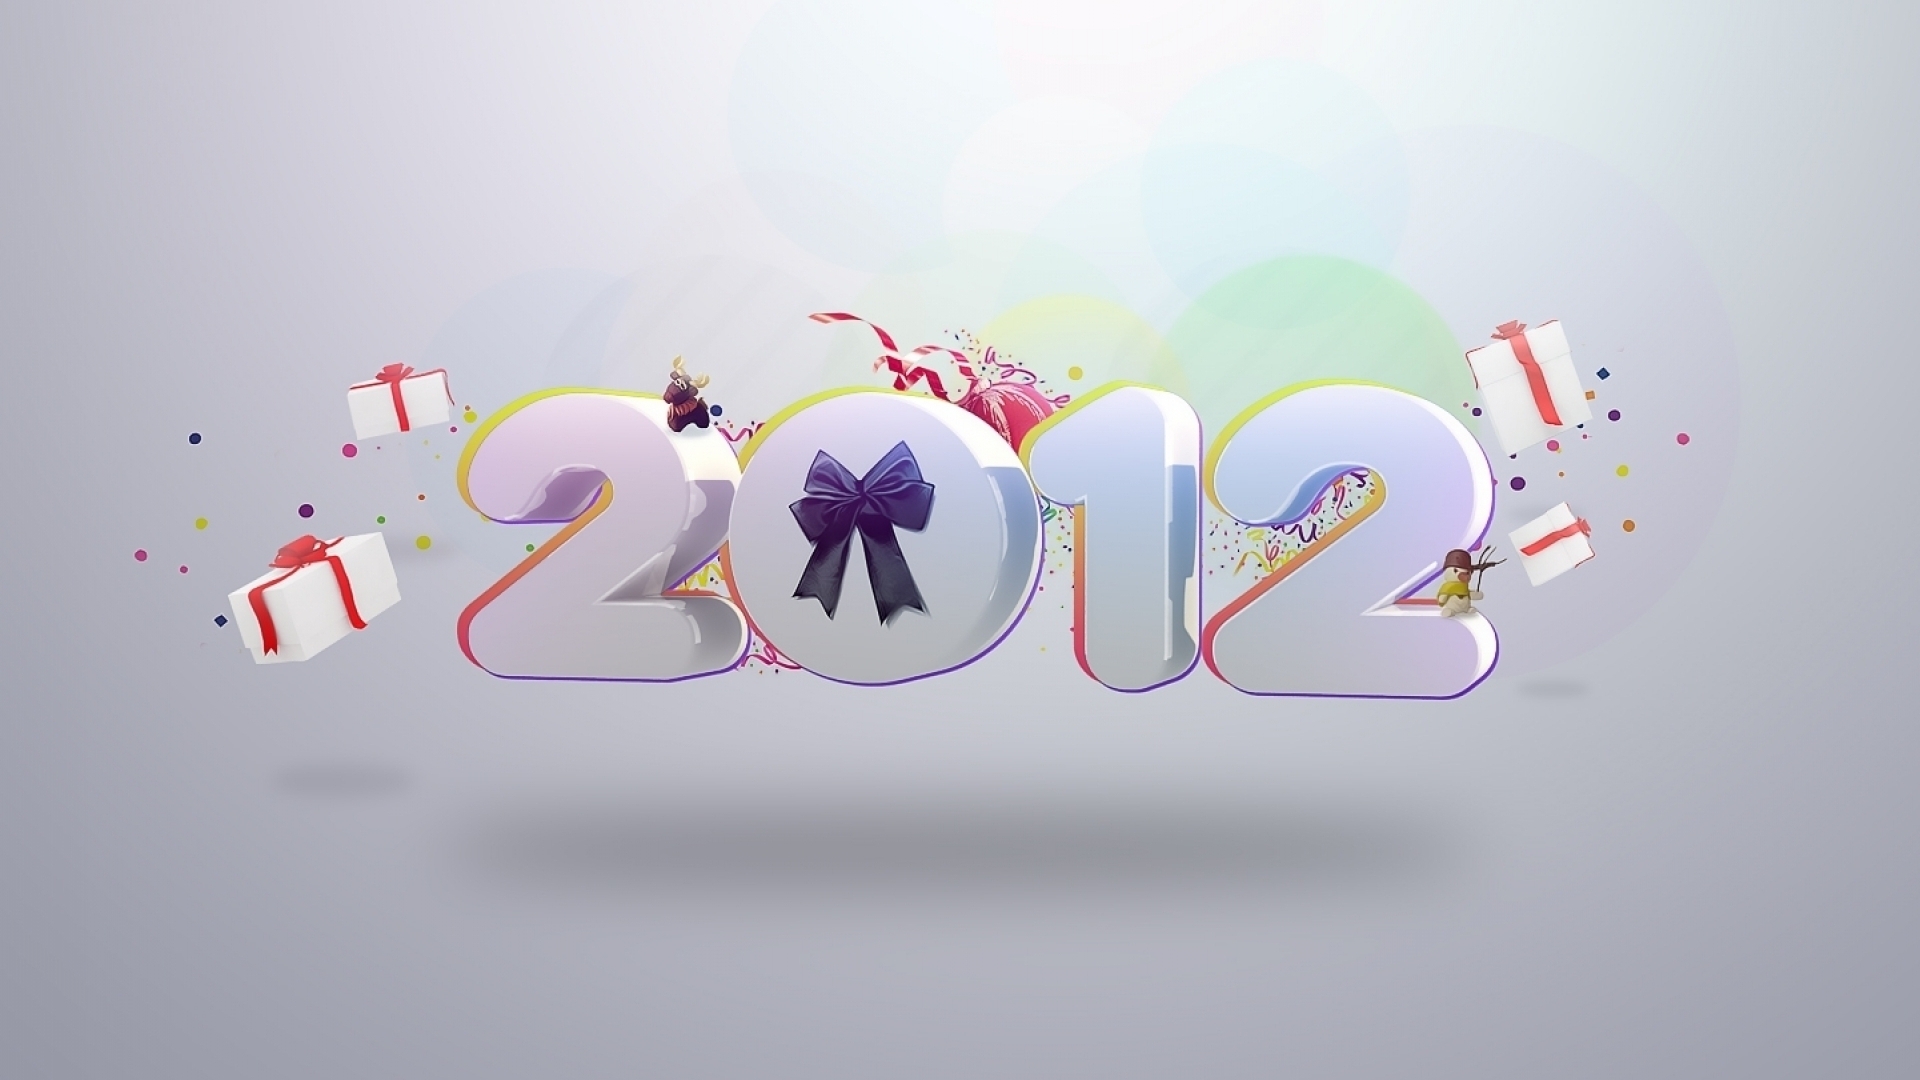 2012 Year Celebration for 1920 x 1080 HDTV 1080p resolution